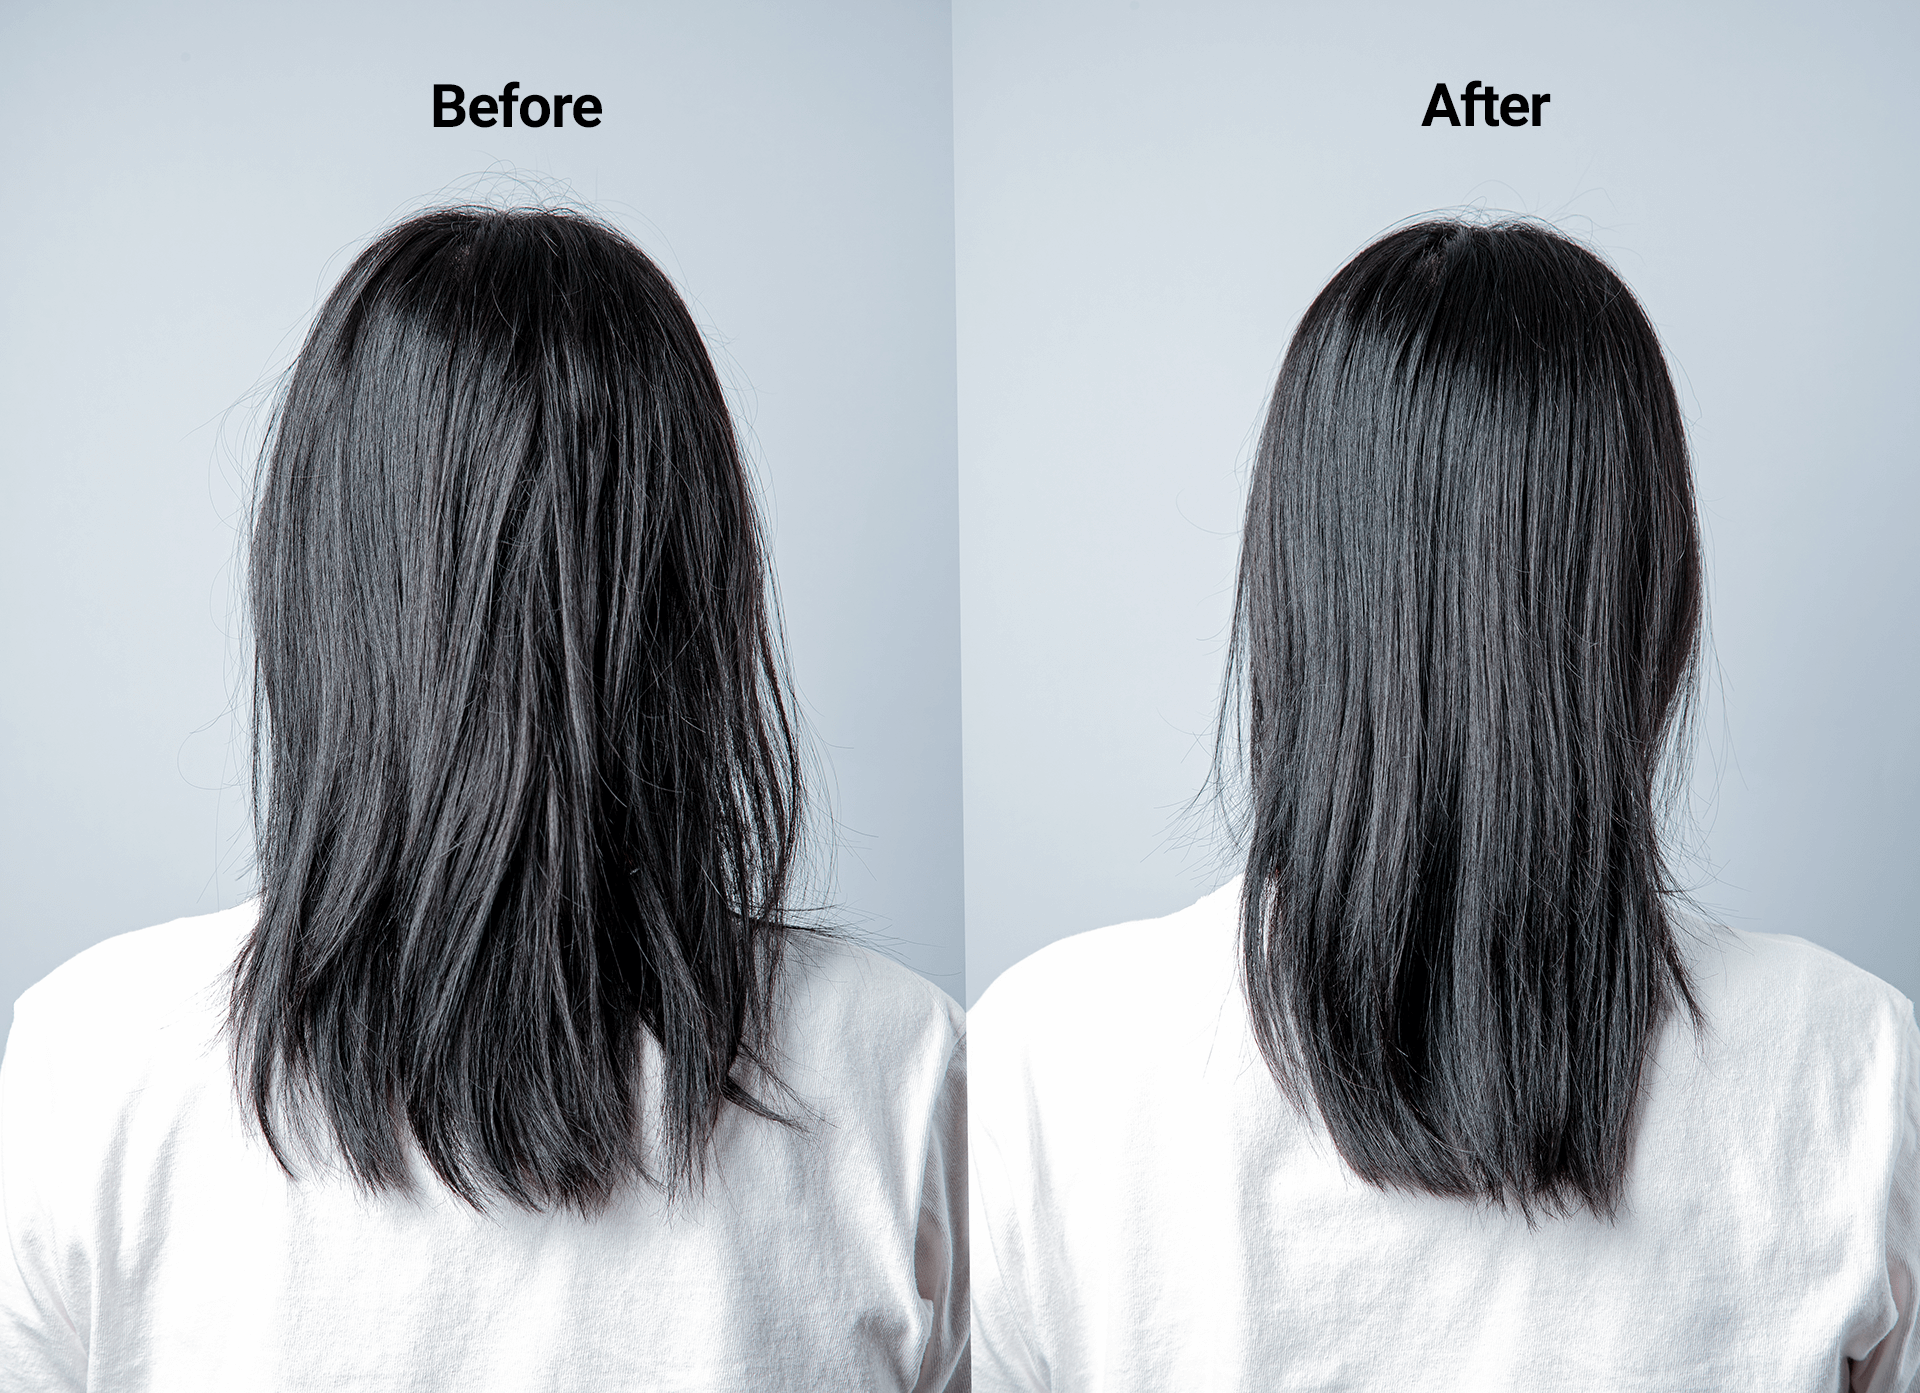 customers have noticed soft and shiny hair, hydrated scalp, and reduced frizziness with H201SHIFT showerhead filter.